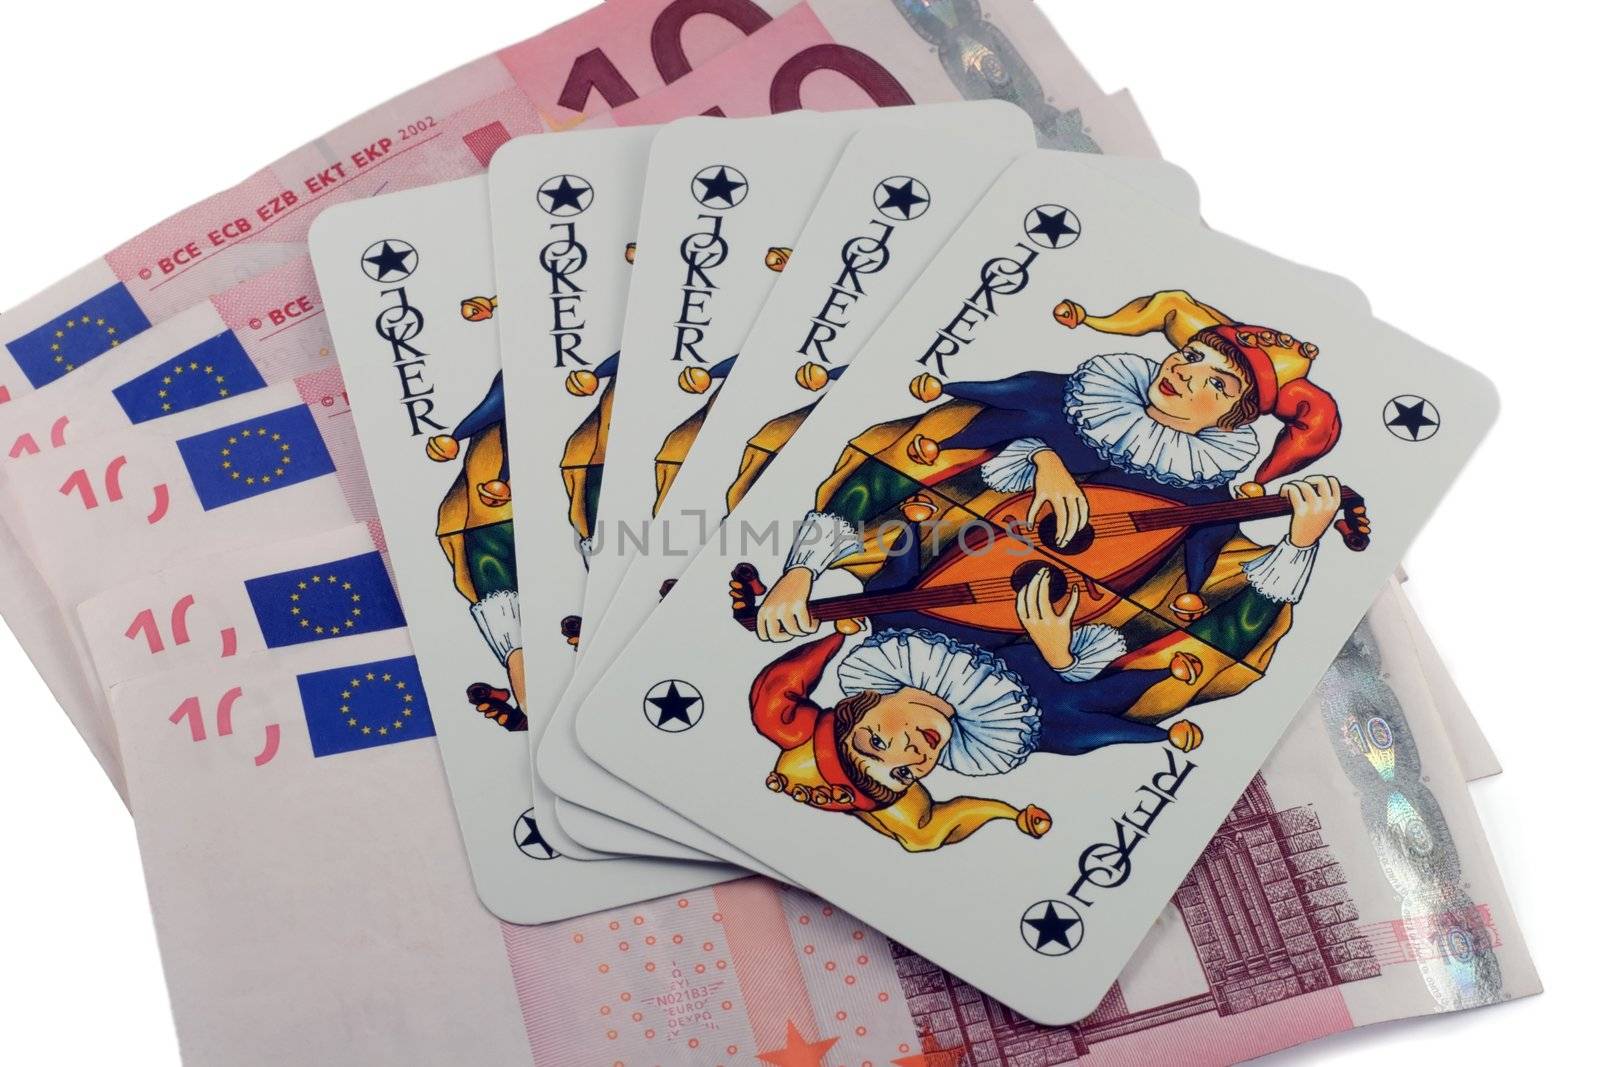 Five card jokers are resting on 10 euro bills.
isolated on a white background